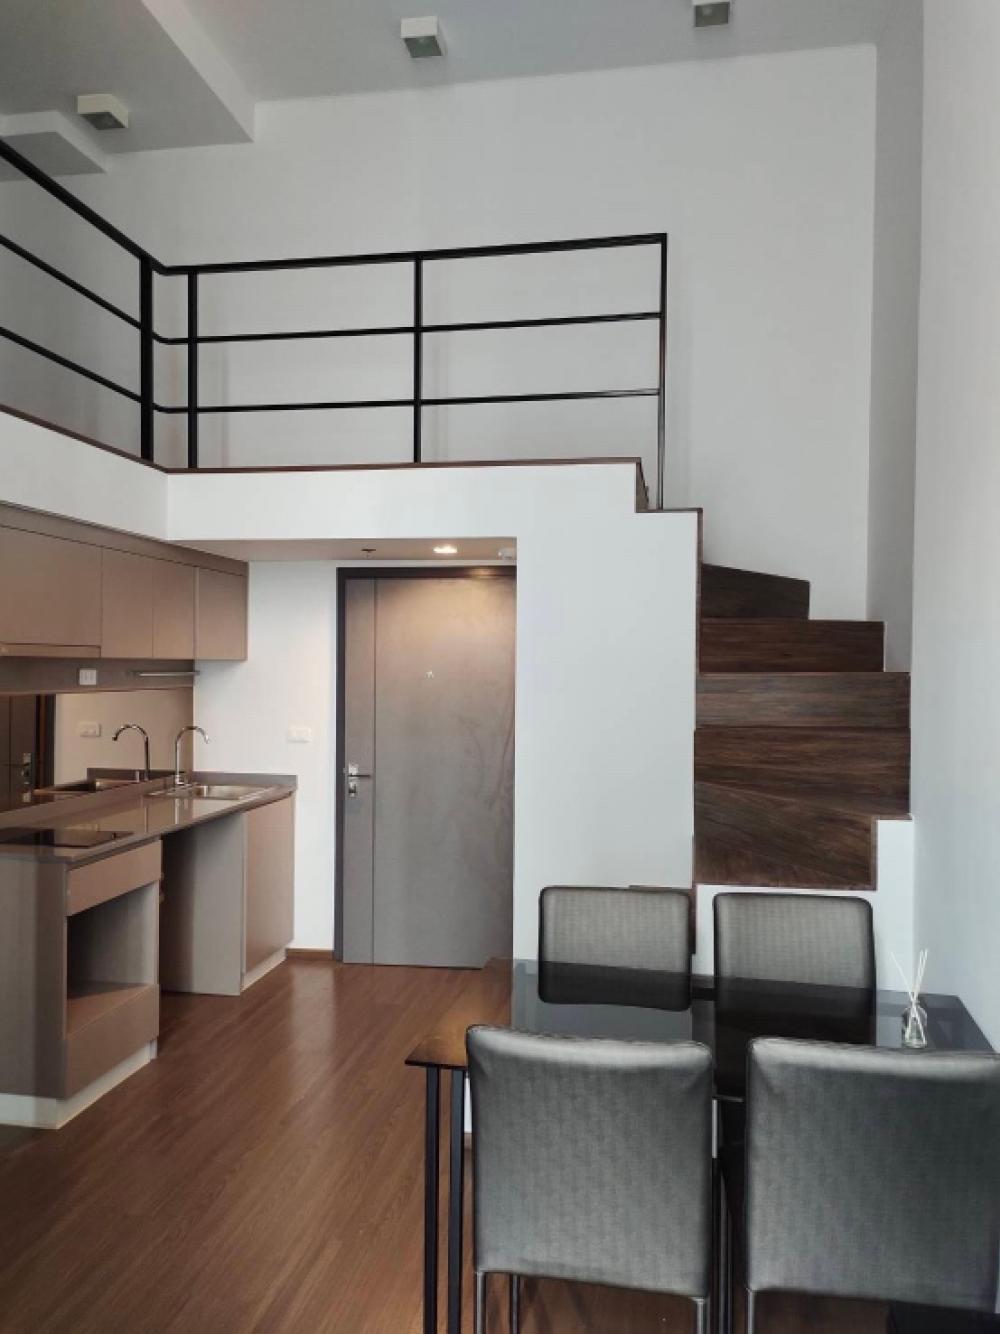 For SaleCondoRama9, Petchburi, RCA : For sale Condo for sale near Rama IX! ideo new rama9 (Ideo Rama 9, new cut) hybrid 2 bed 52 sq m, floor 24+, price 5,0490,000 baht, free of all expenses.